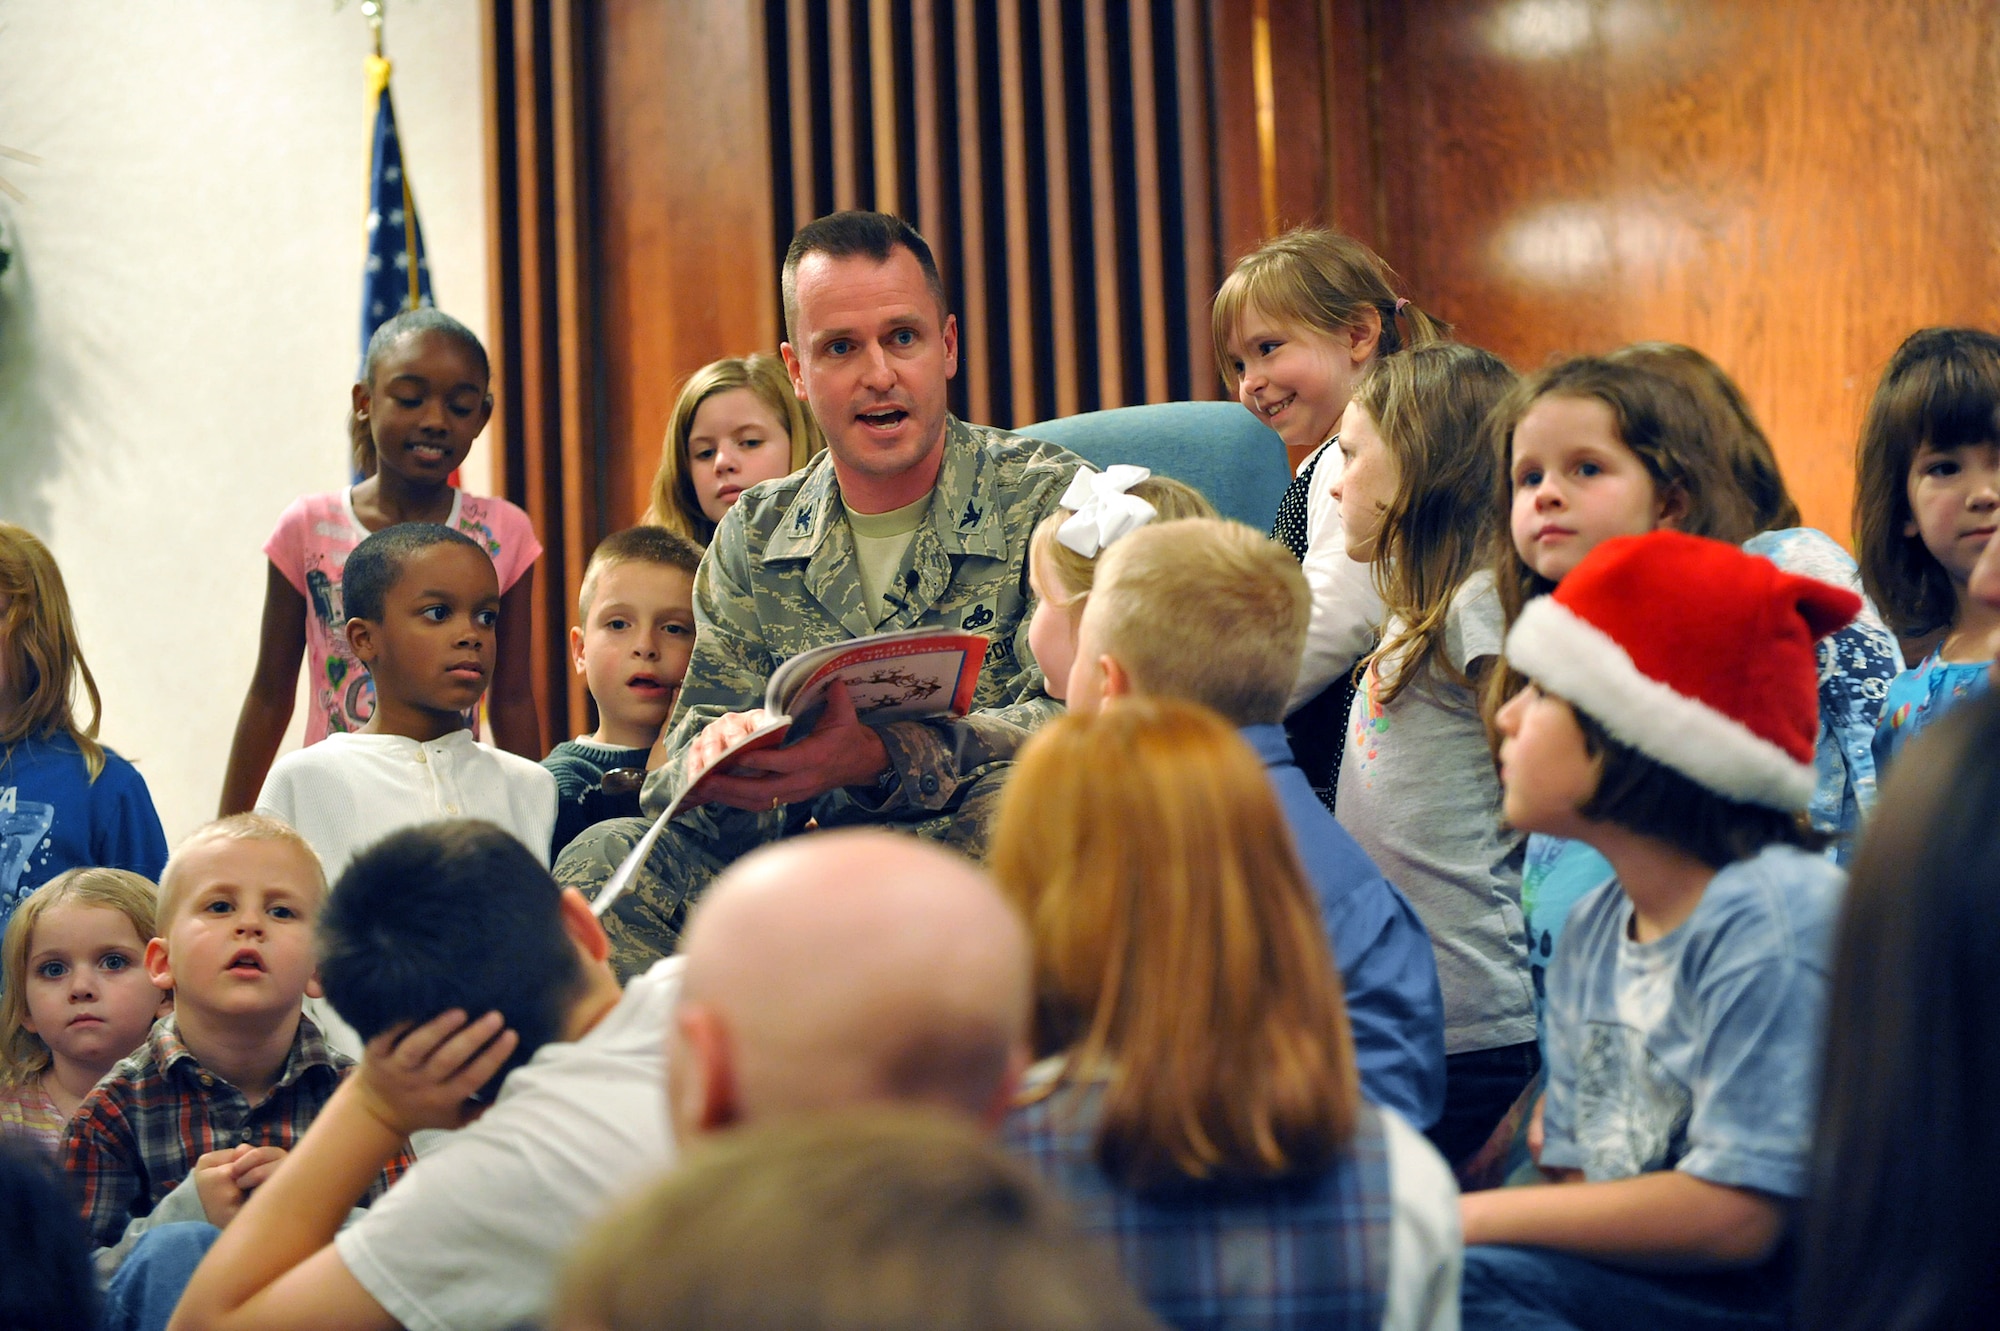 Col. Carl Buhler, 78th Air Base Wing commander, reads "T'was the night before Christmas" to a group of Robins children. U. S. Air Force photo by Tommie Horton